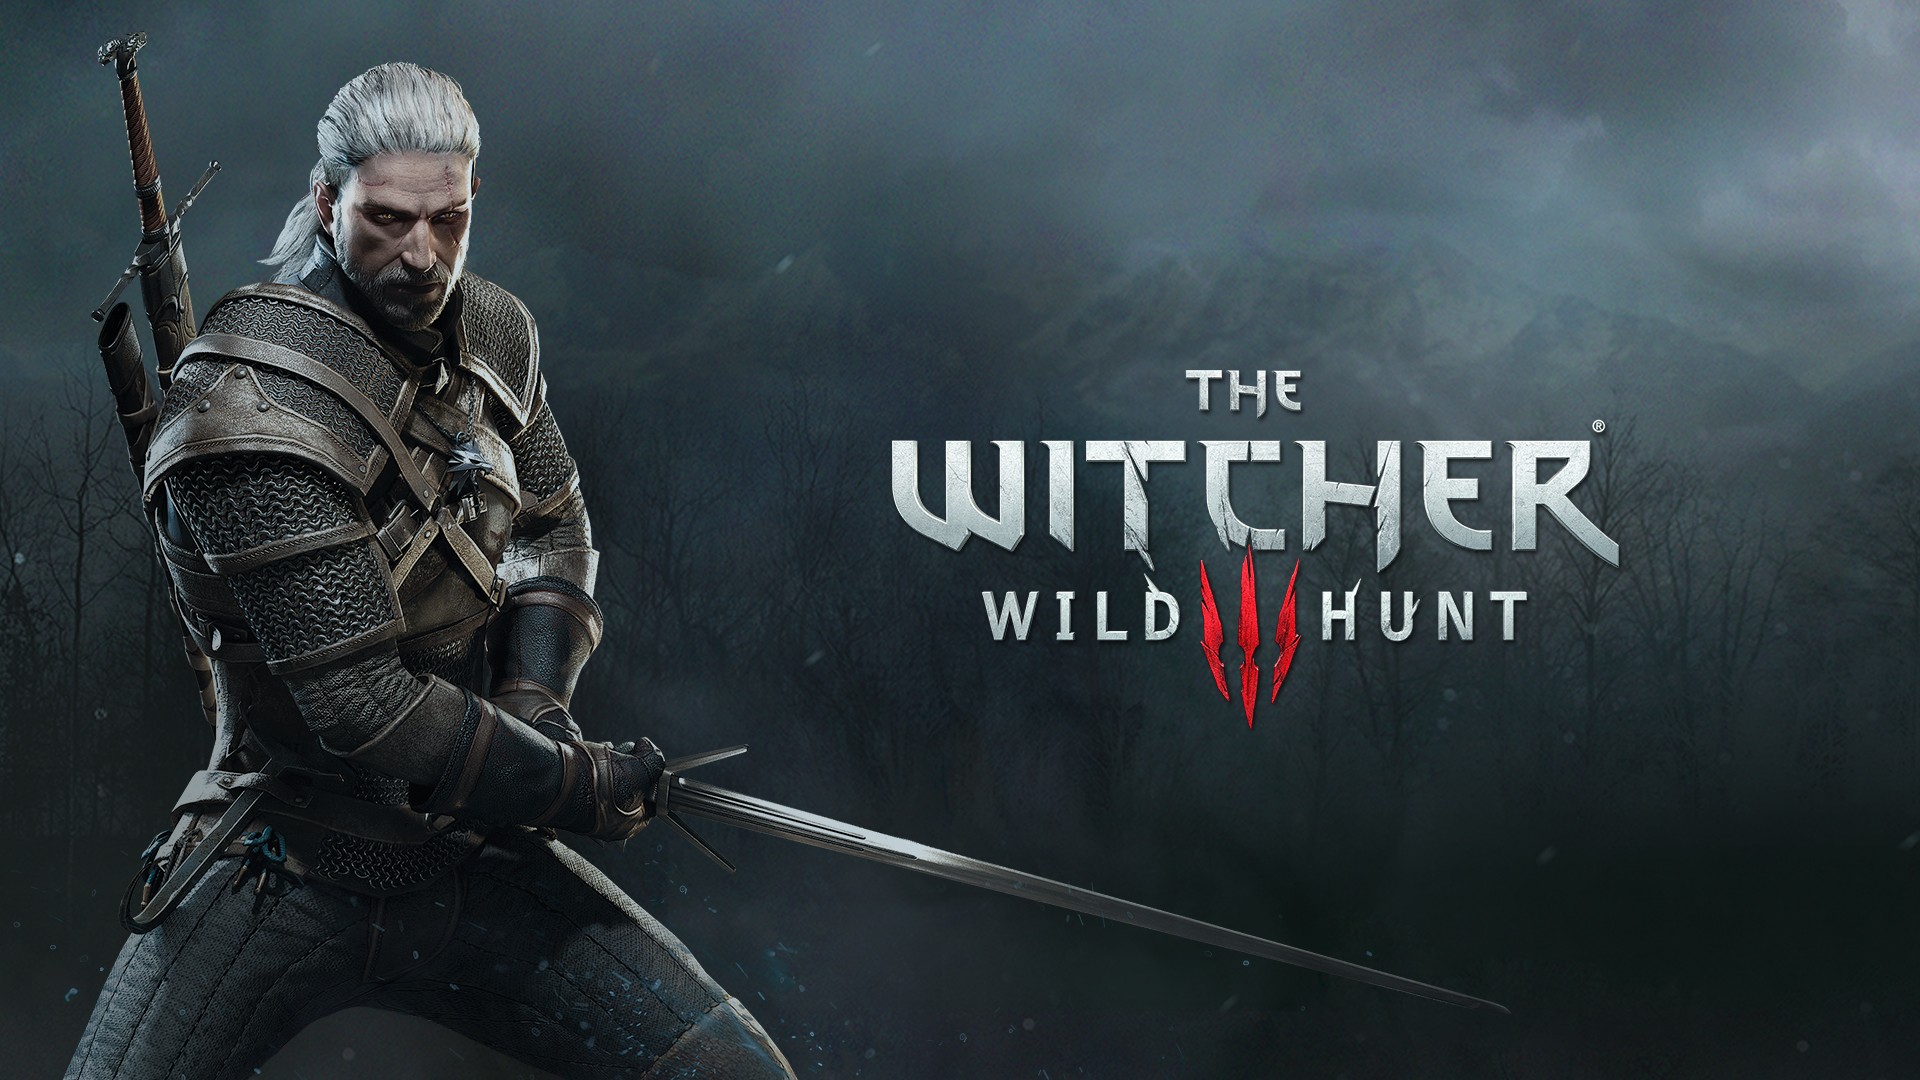 Geralt of Rivia, The Witcher, The Witcher 3: Wild Hunt Wallpaper